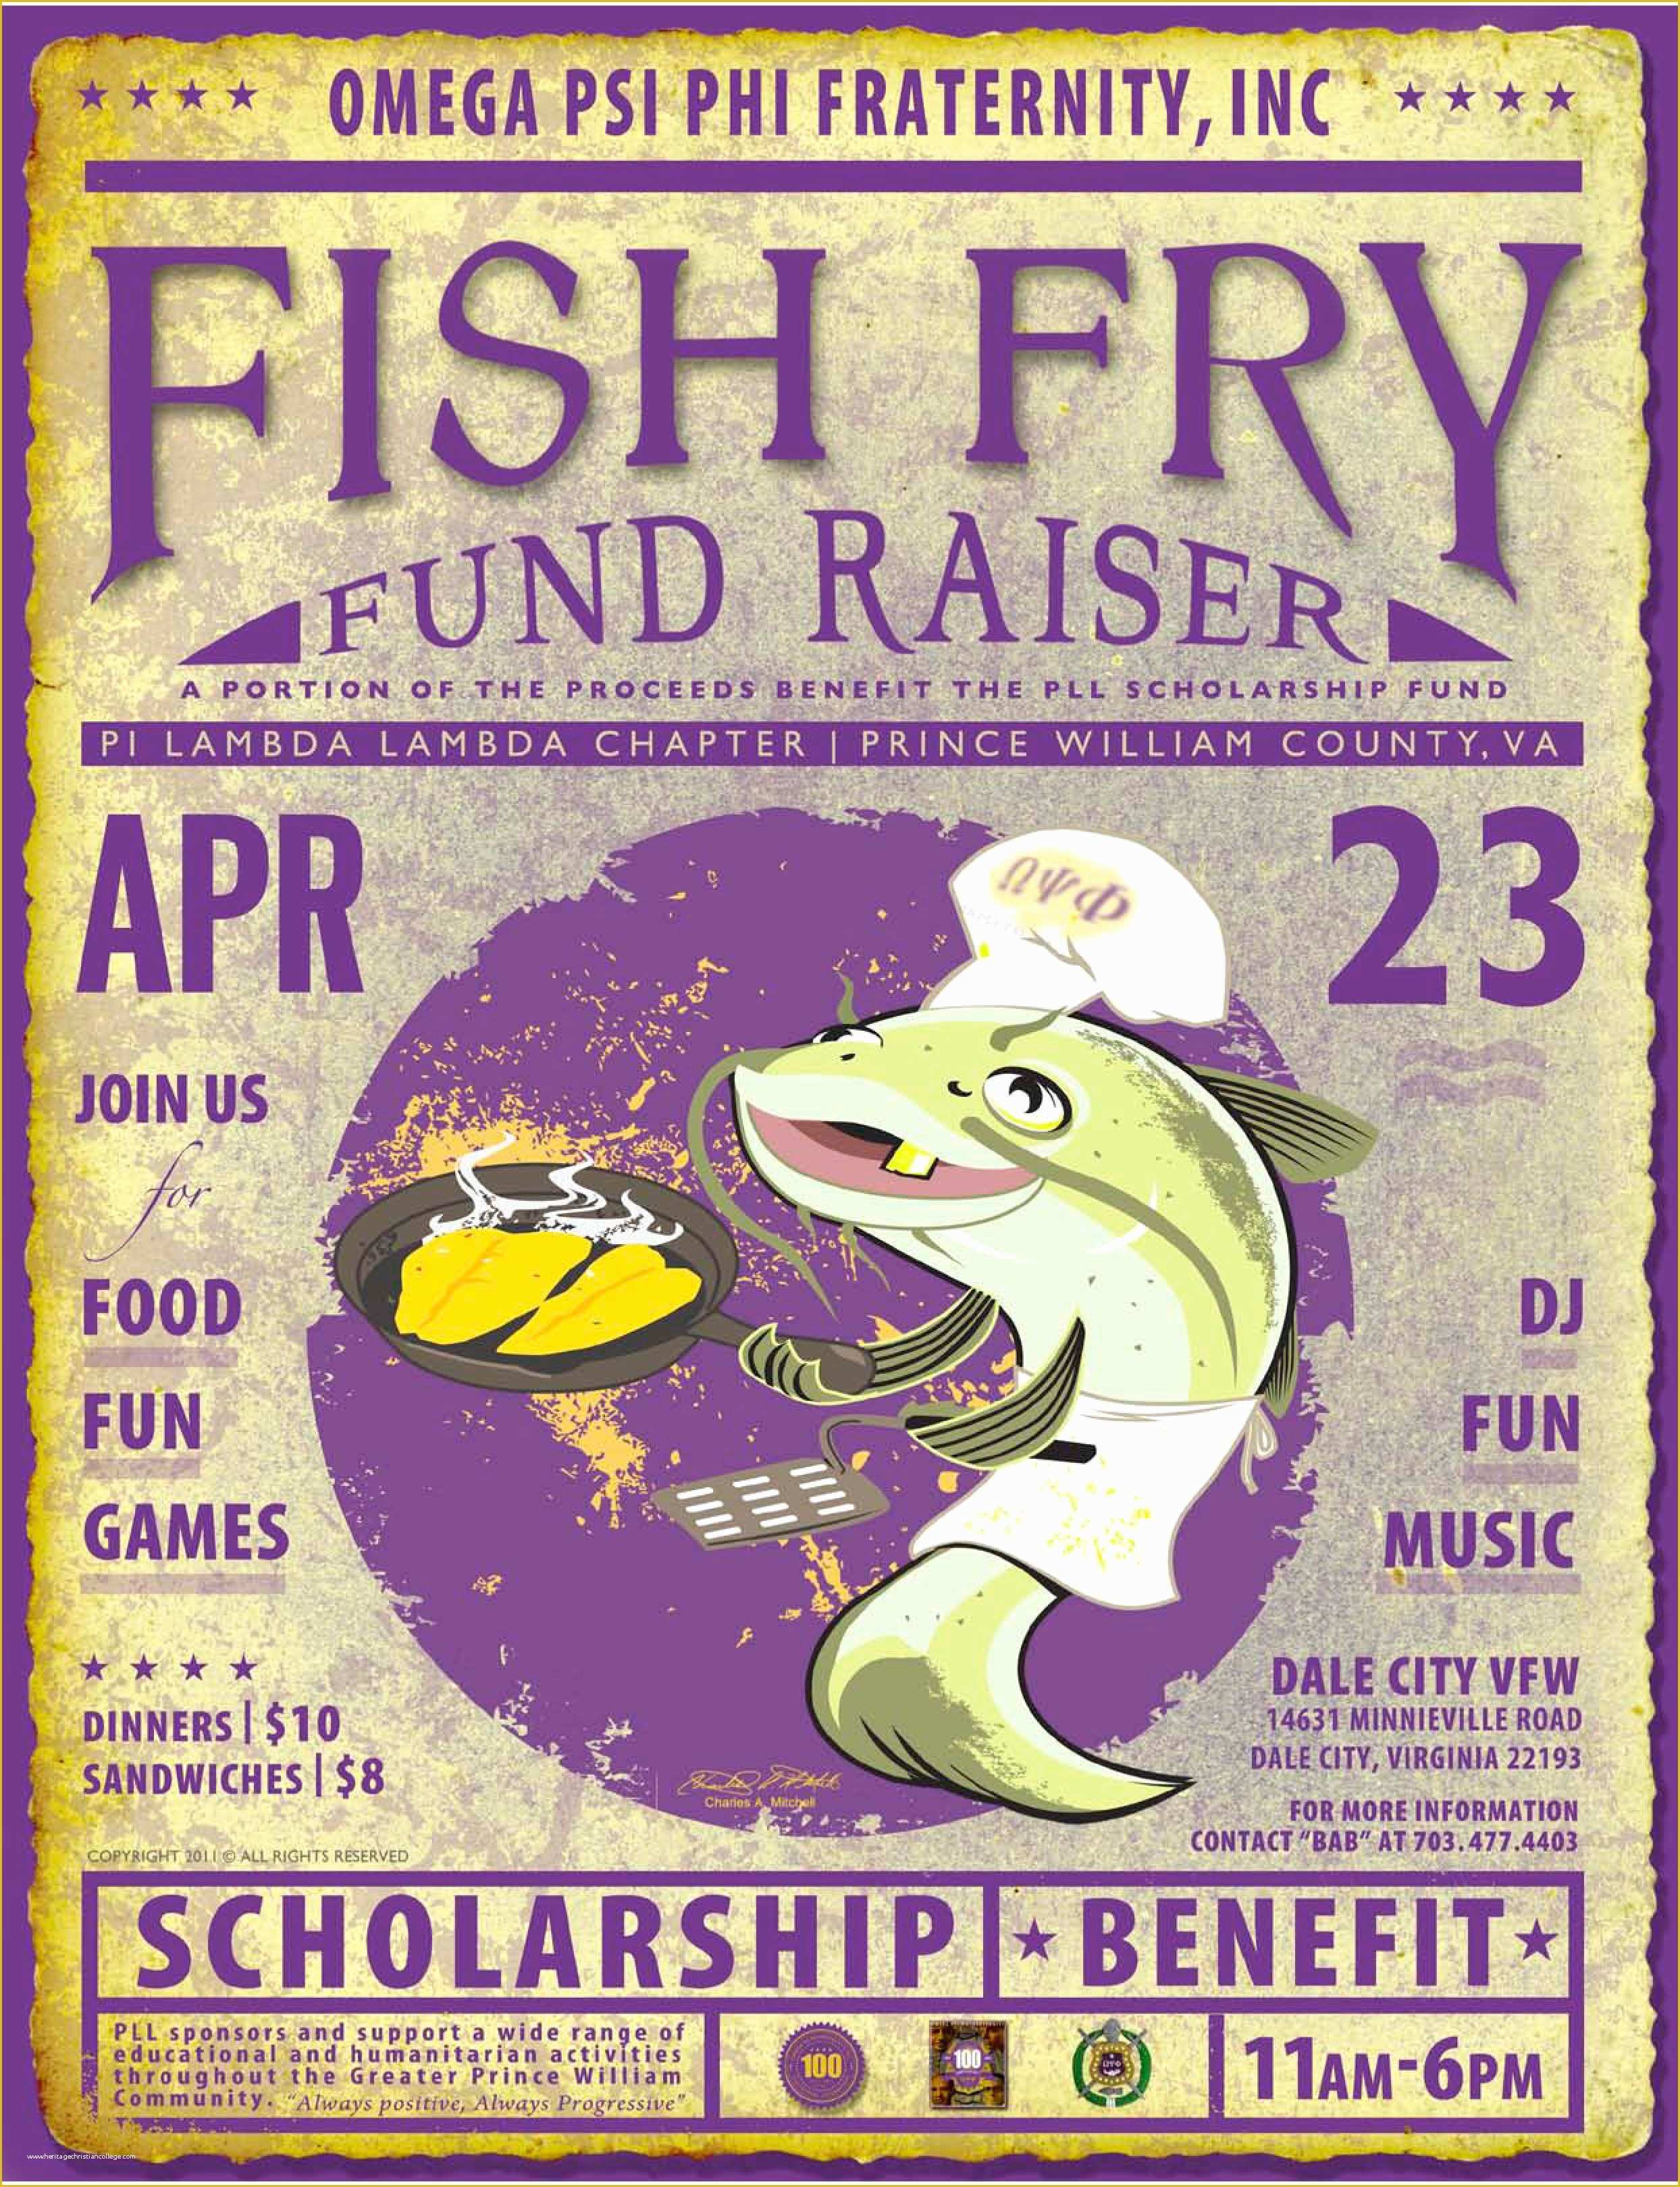 Free Fish Fry Flyer Template Of Great Poster for A Fish Fry Fundraising event You Can